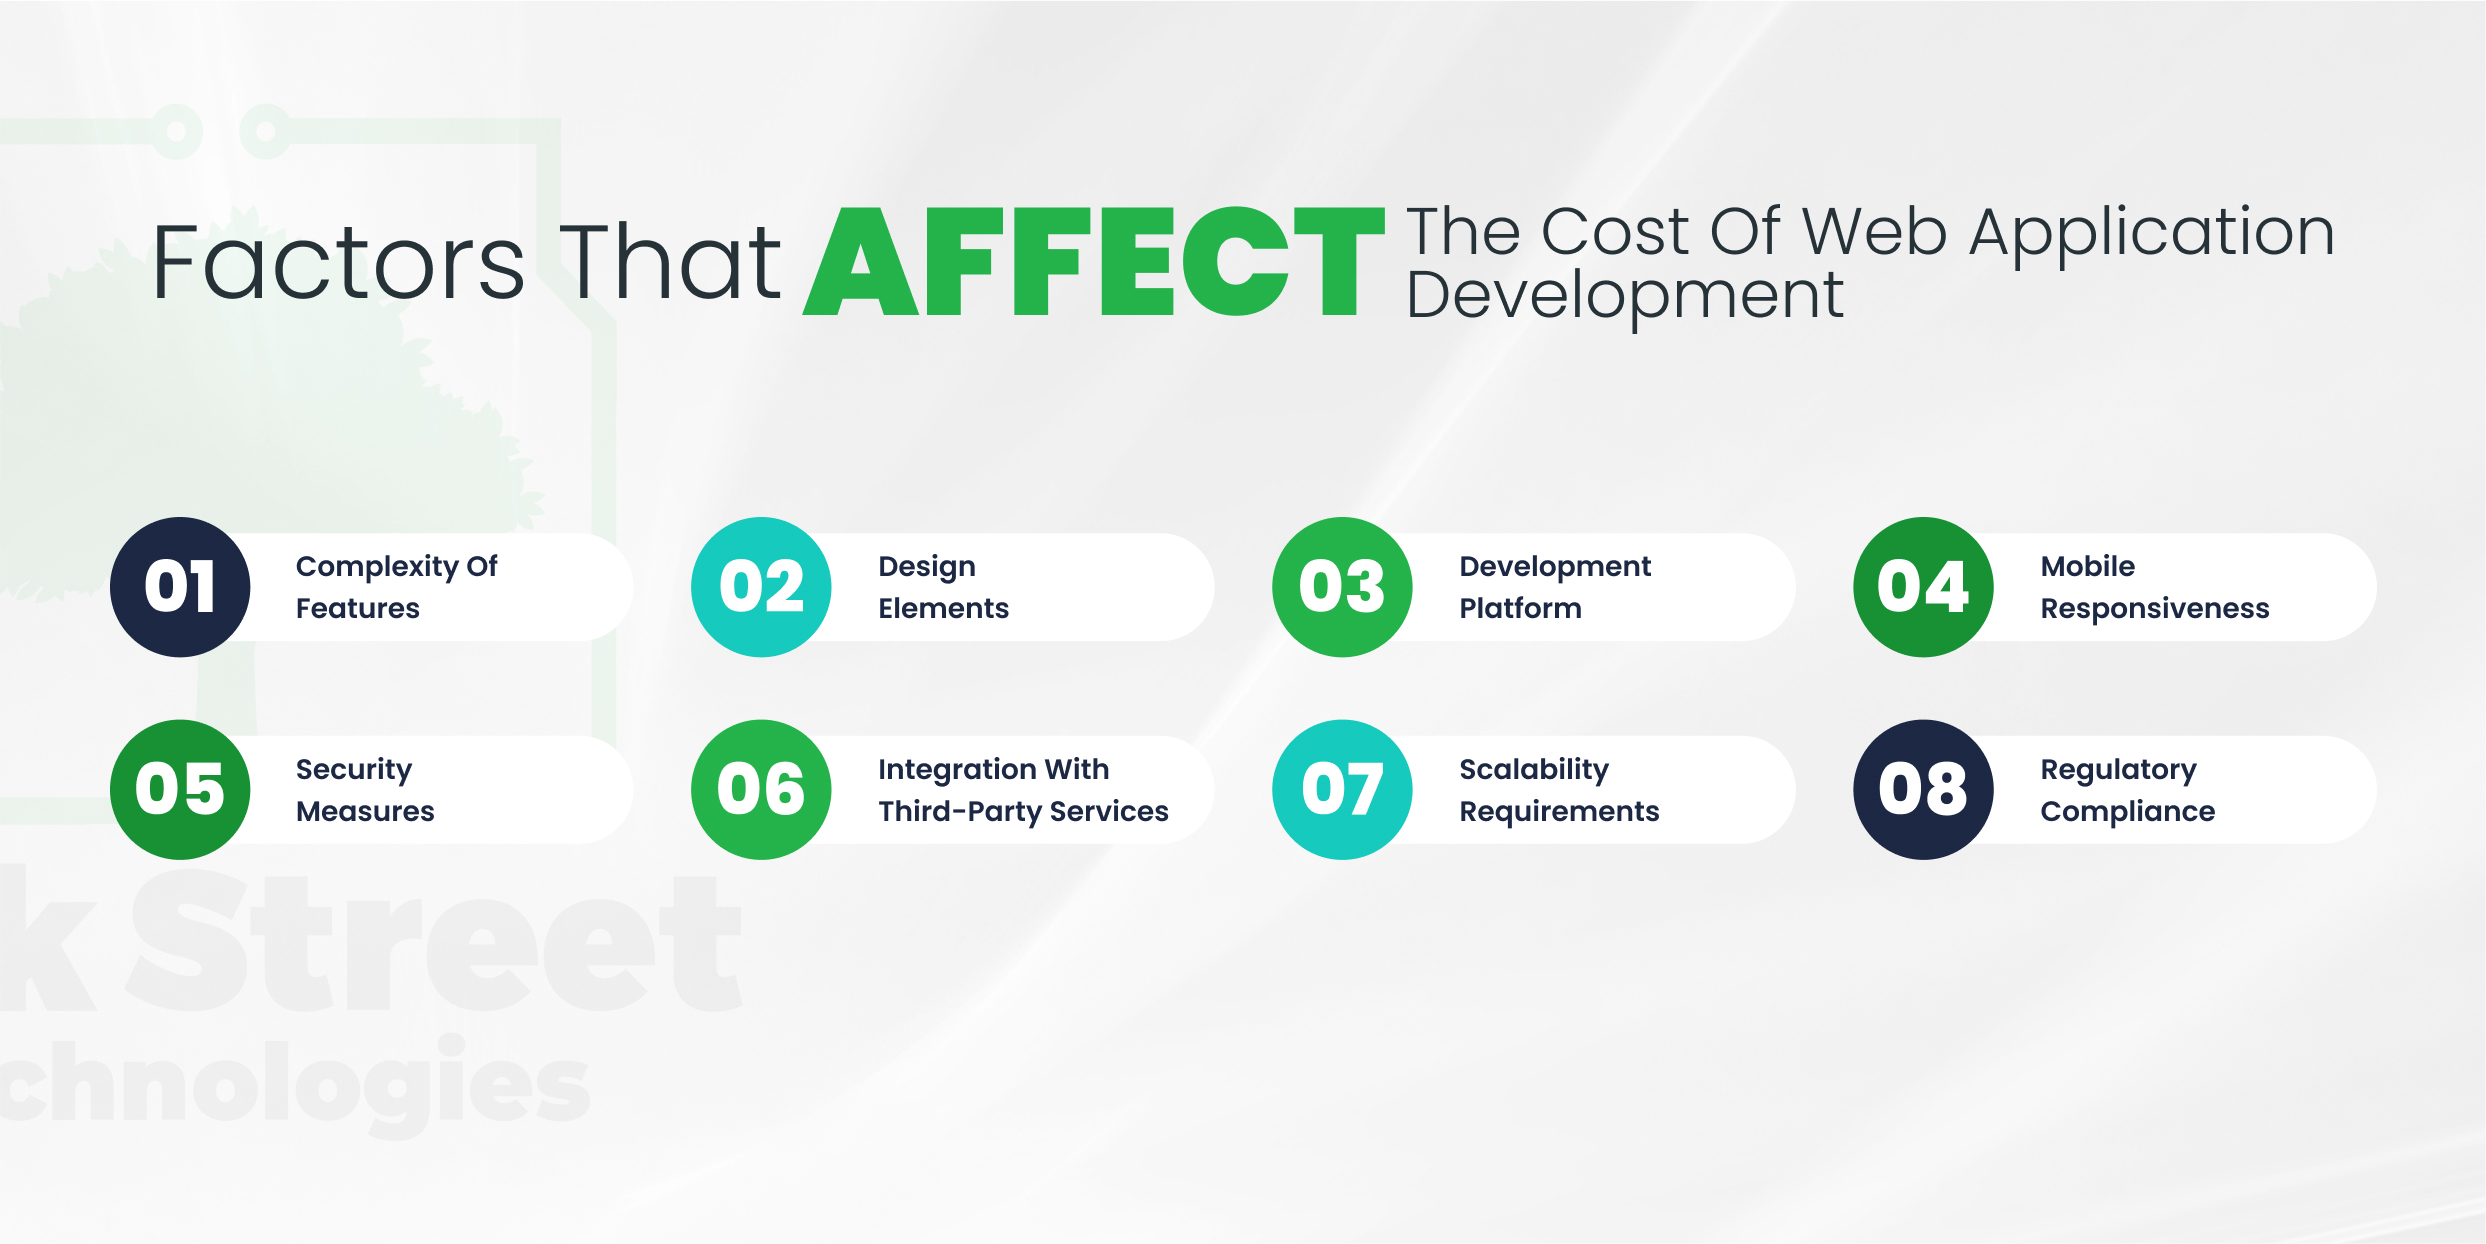 Factors that Affect the Cost of Web Application Development